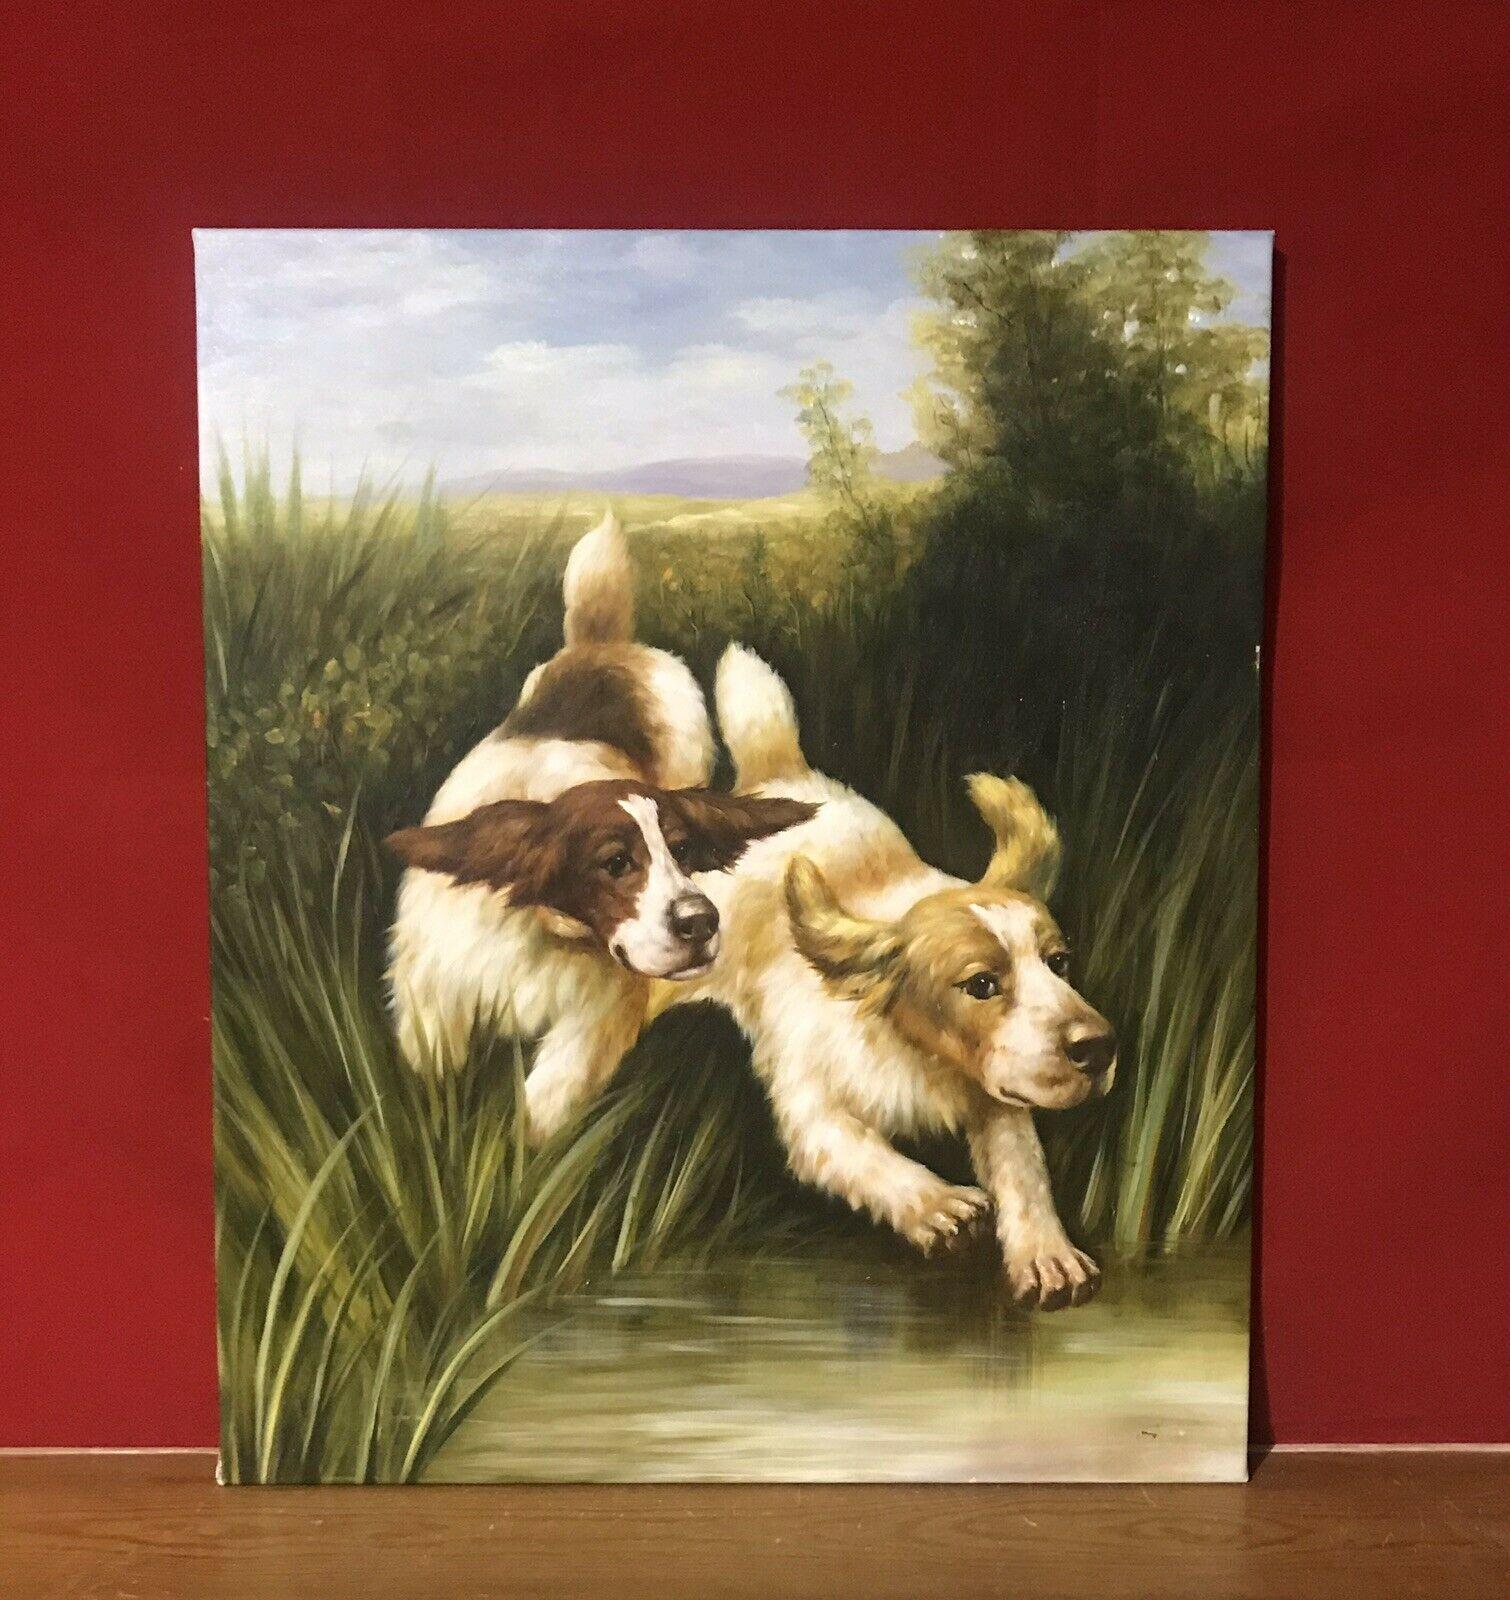 SPANIELS CHASING THROUGH REED BEDS - LARGE OIL PAINTING ON CANVAS - Victorian Painting by Unknown